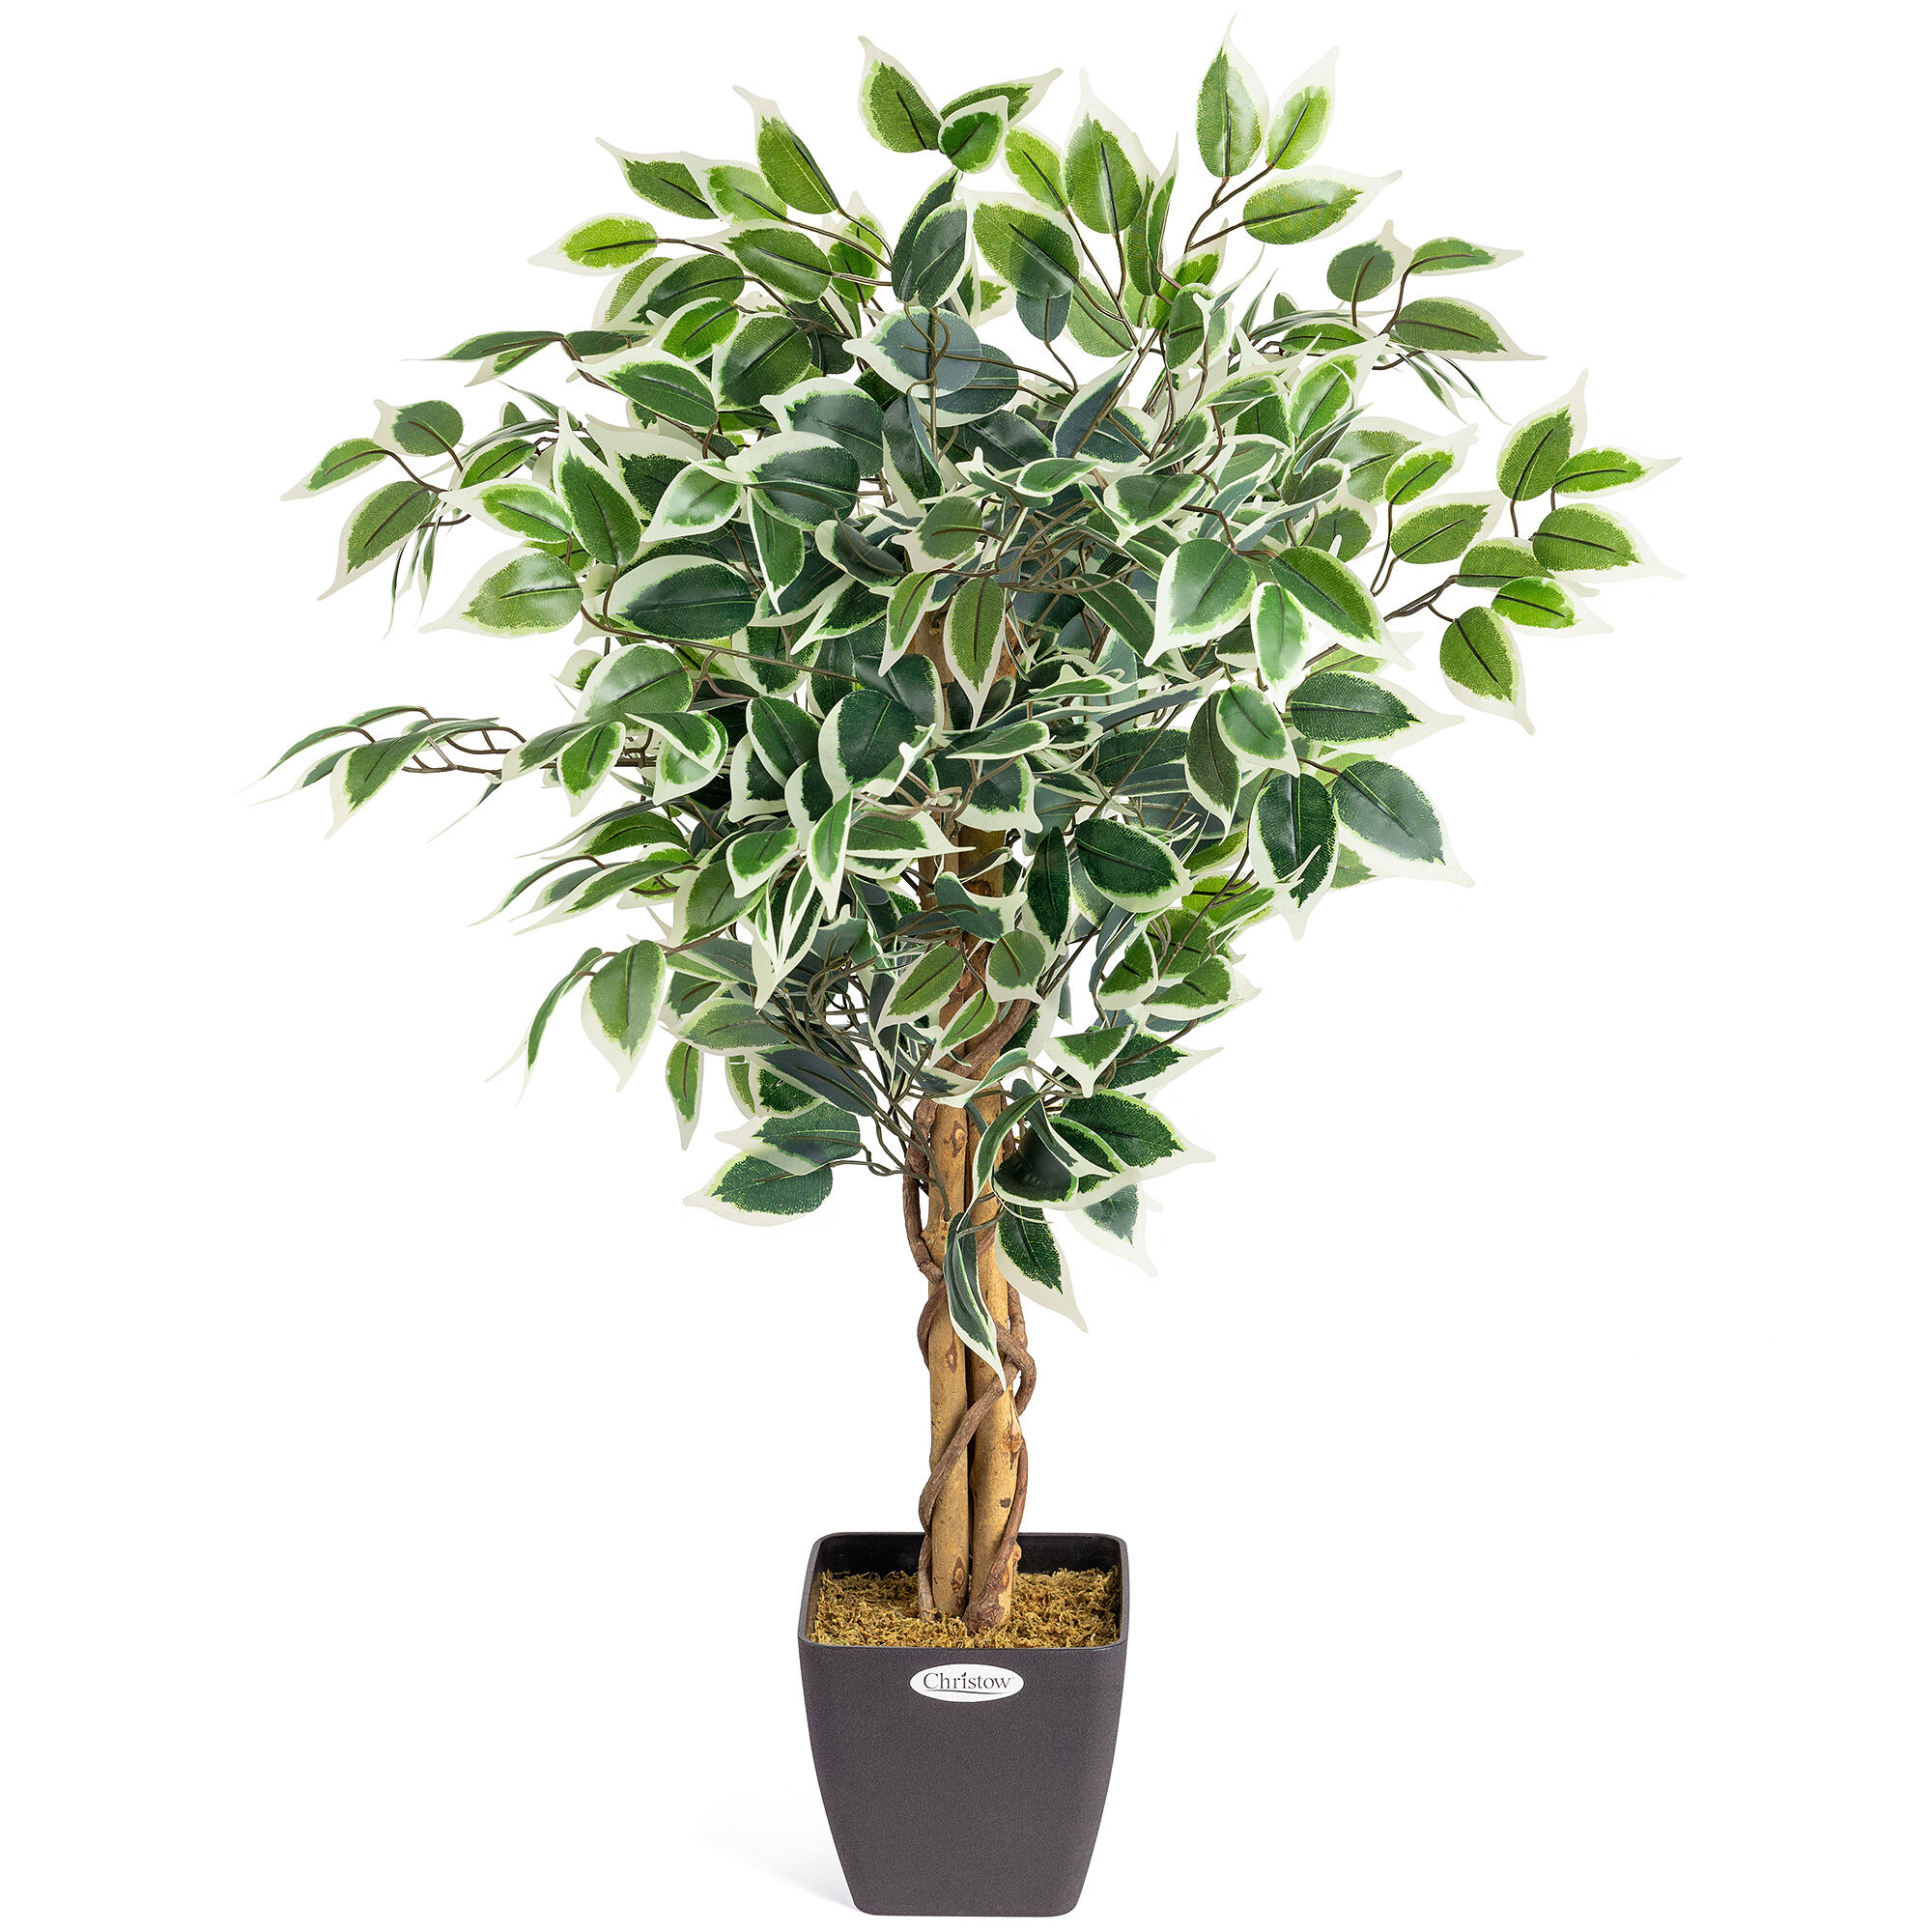 Christow Artificial Variegated Ficus Tree - Green